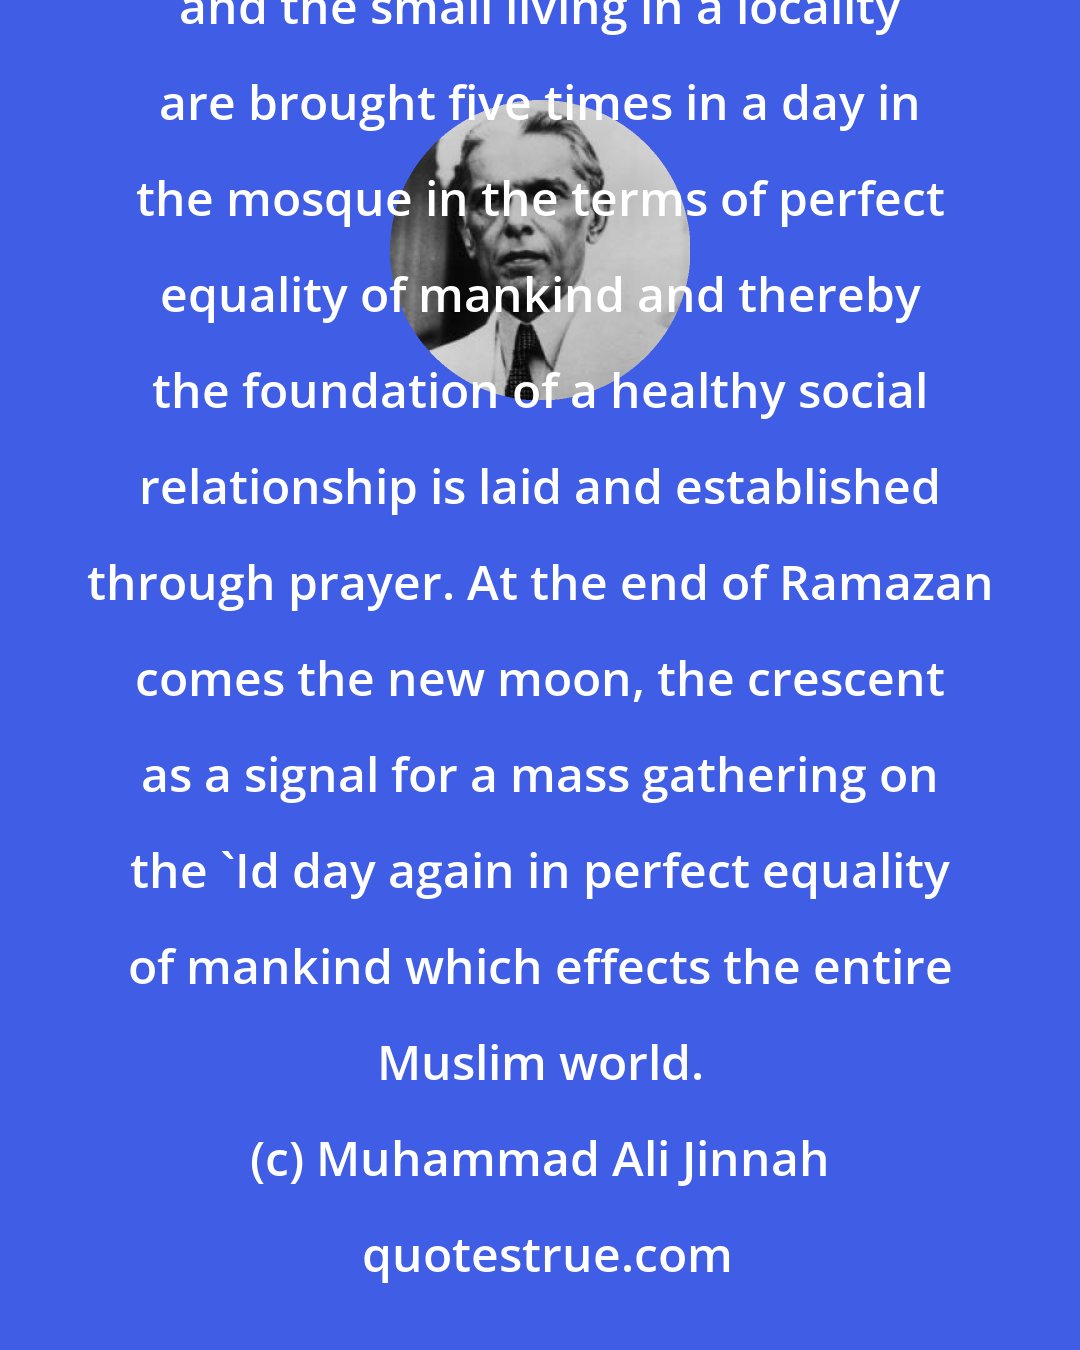 Muhammad Ali Jinnah: Islam lays great emphasis on the social side of things. Every day, the rich and the poor, the great and the small living in a locality are brought five times in a day in the mosque in the terms of perfect equality of mankind and thereby the foundation of a healthy social relationship is laid and established through prayer. At the end of Ramazan comes the new moon, the crescent as a signal for a mass gathering on the 'Id day again in perfect equality of mankind which effects the entire Muslim world.